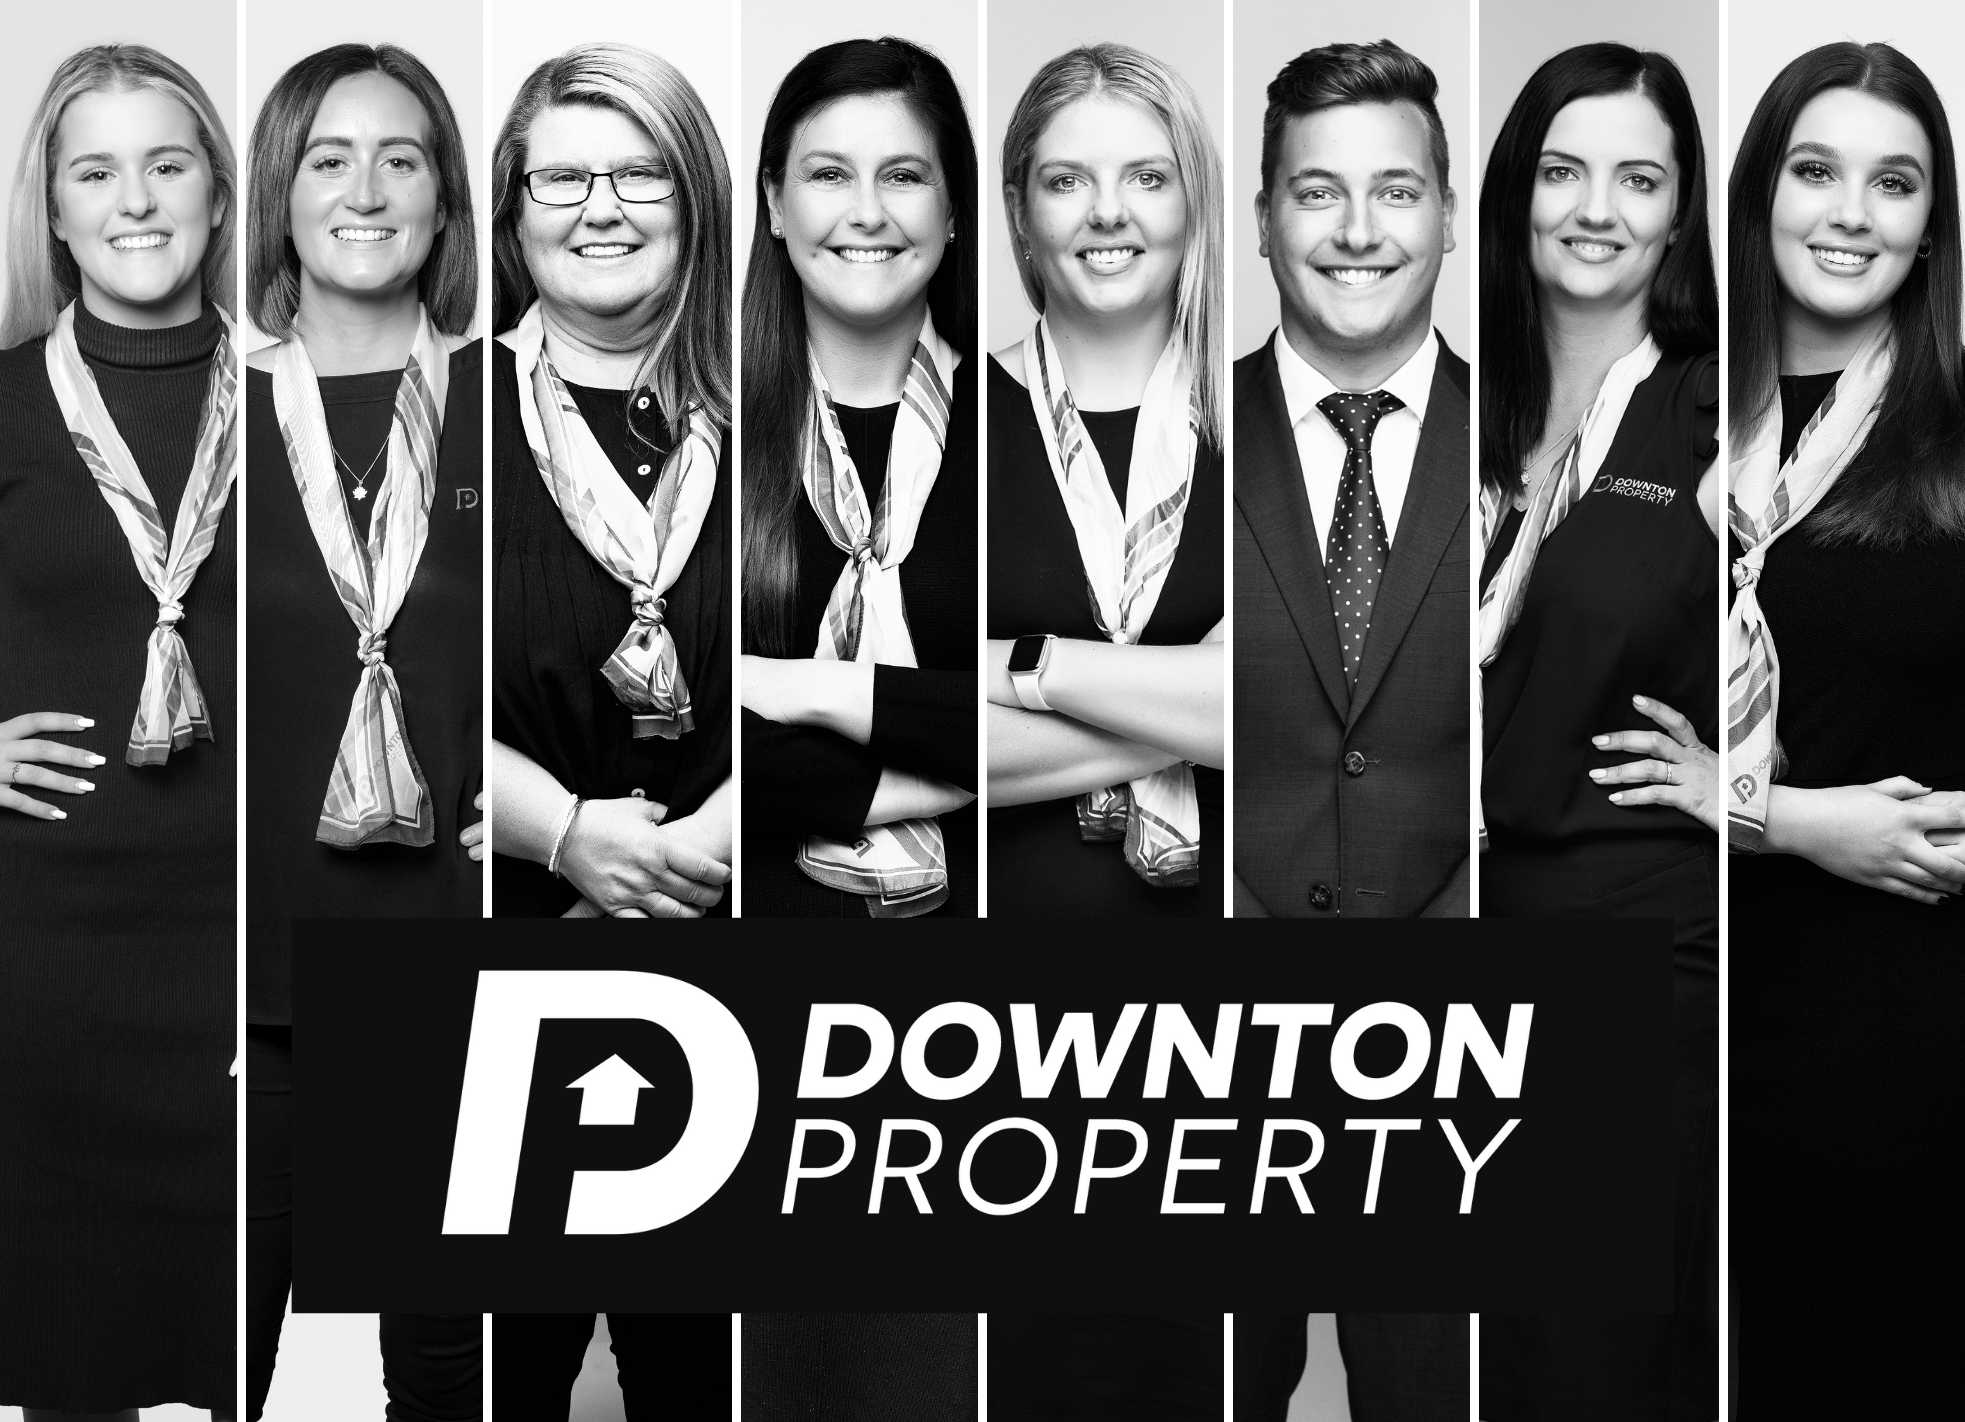 Downton Property Team Collage